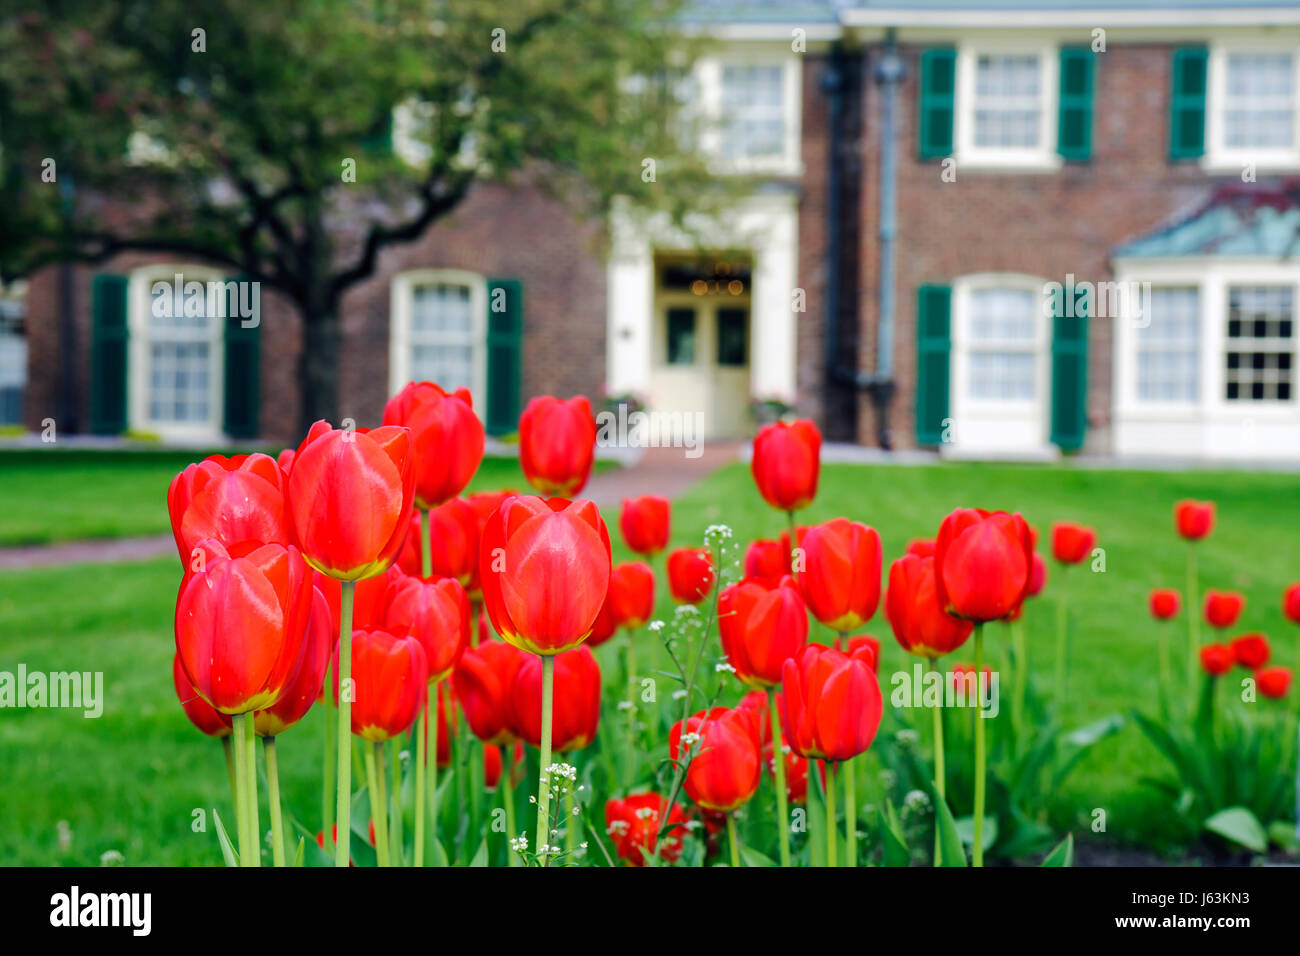 Michigan,MI,Mich,Upper Midwest,Saginaw County,Saginaw,Montague Inn,Bed and Breakfast,historic Inn,Lake Linton,Saginaw River water,early spring,garden, Stock Photo